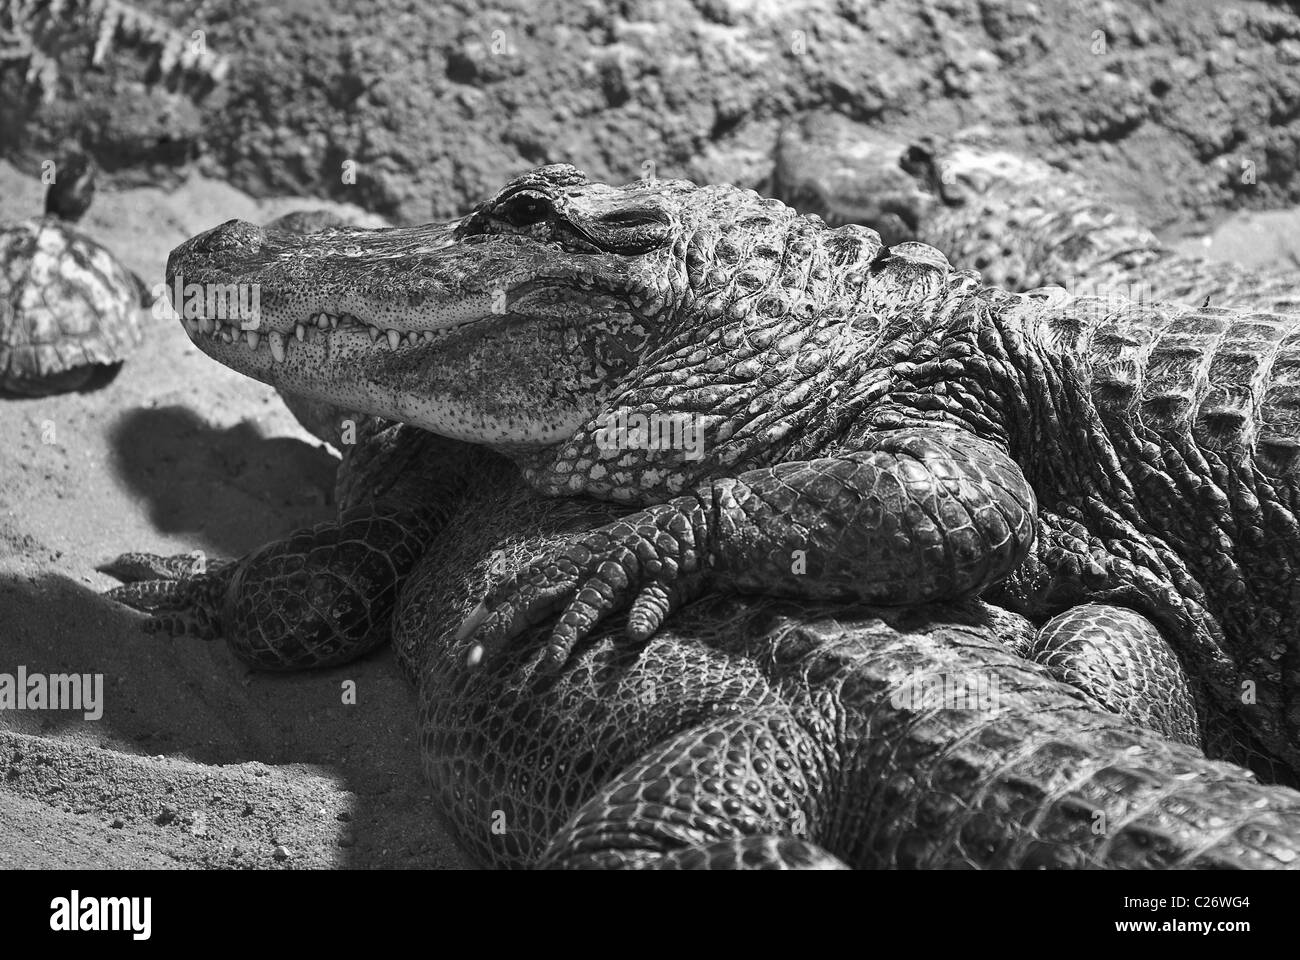 Two Alligators at rest in black and white Stock Photo